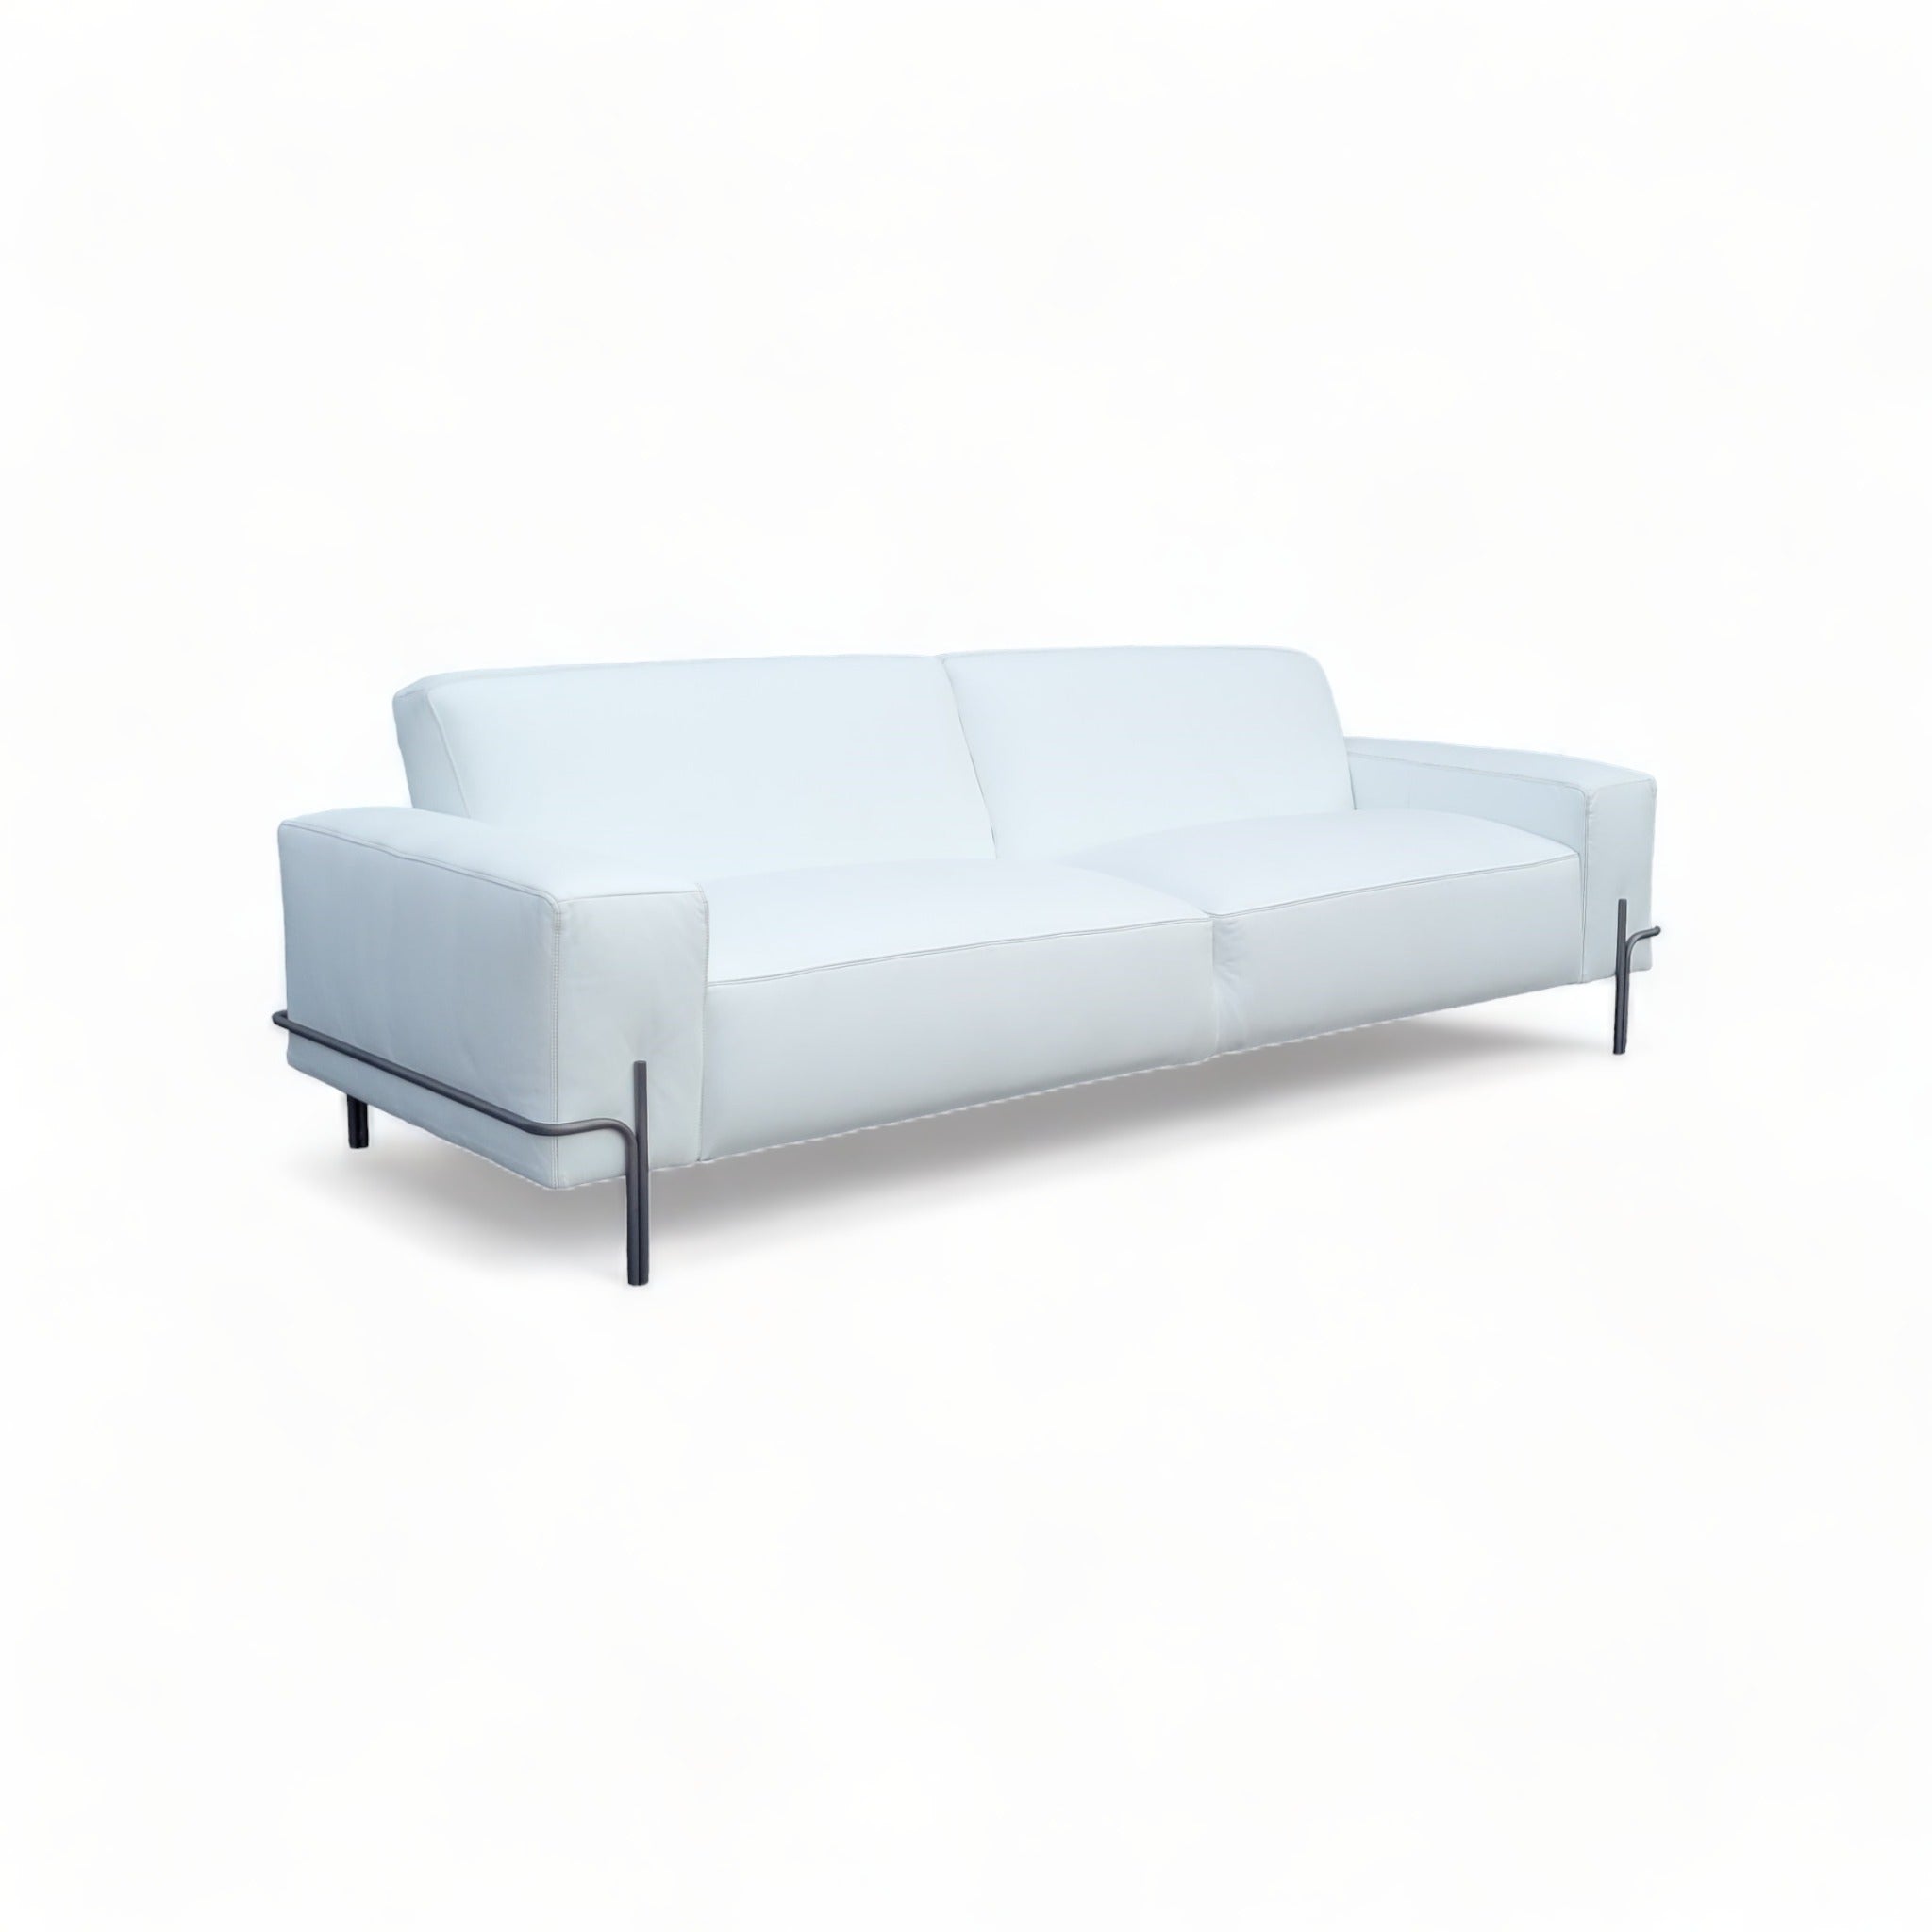 Anis White Leather Sofa (Only 1)